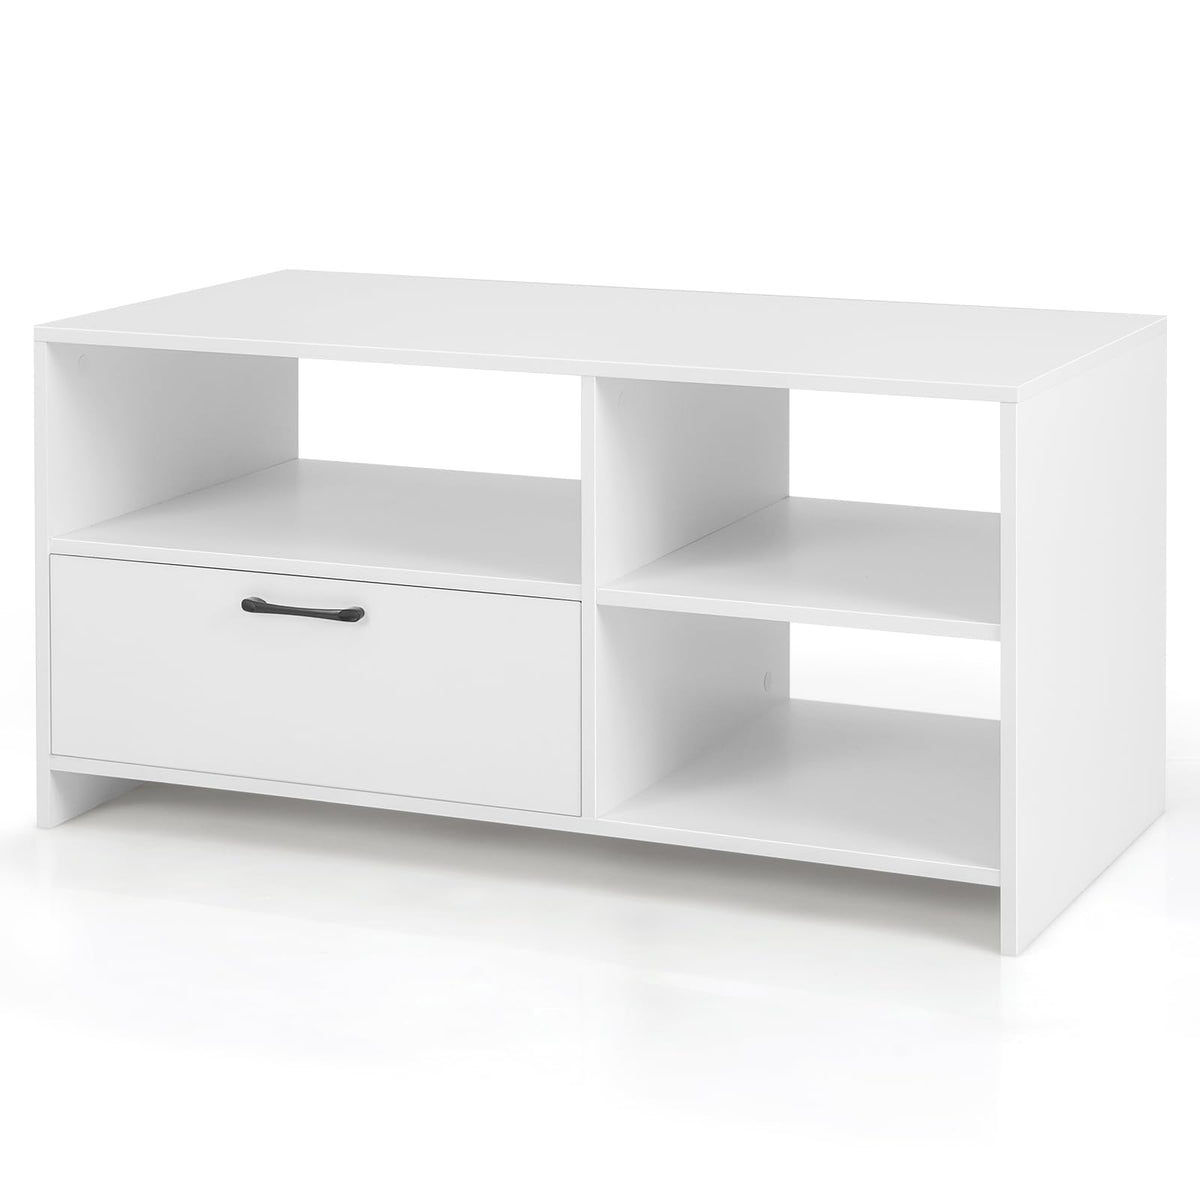 Giantex TV Stand for TVs up to 50", Modern Media Console Table w/ 3 Open Compartments & 1 Storage Drawer